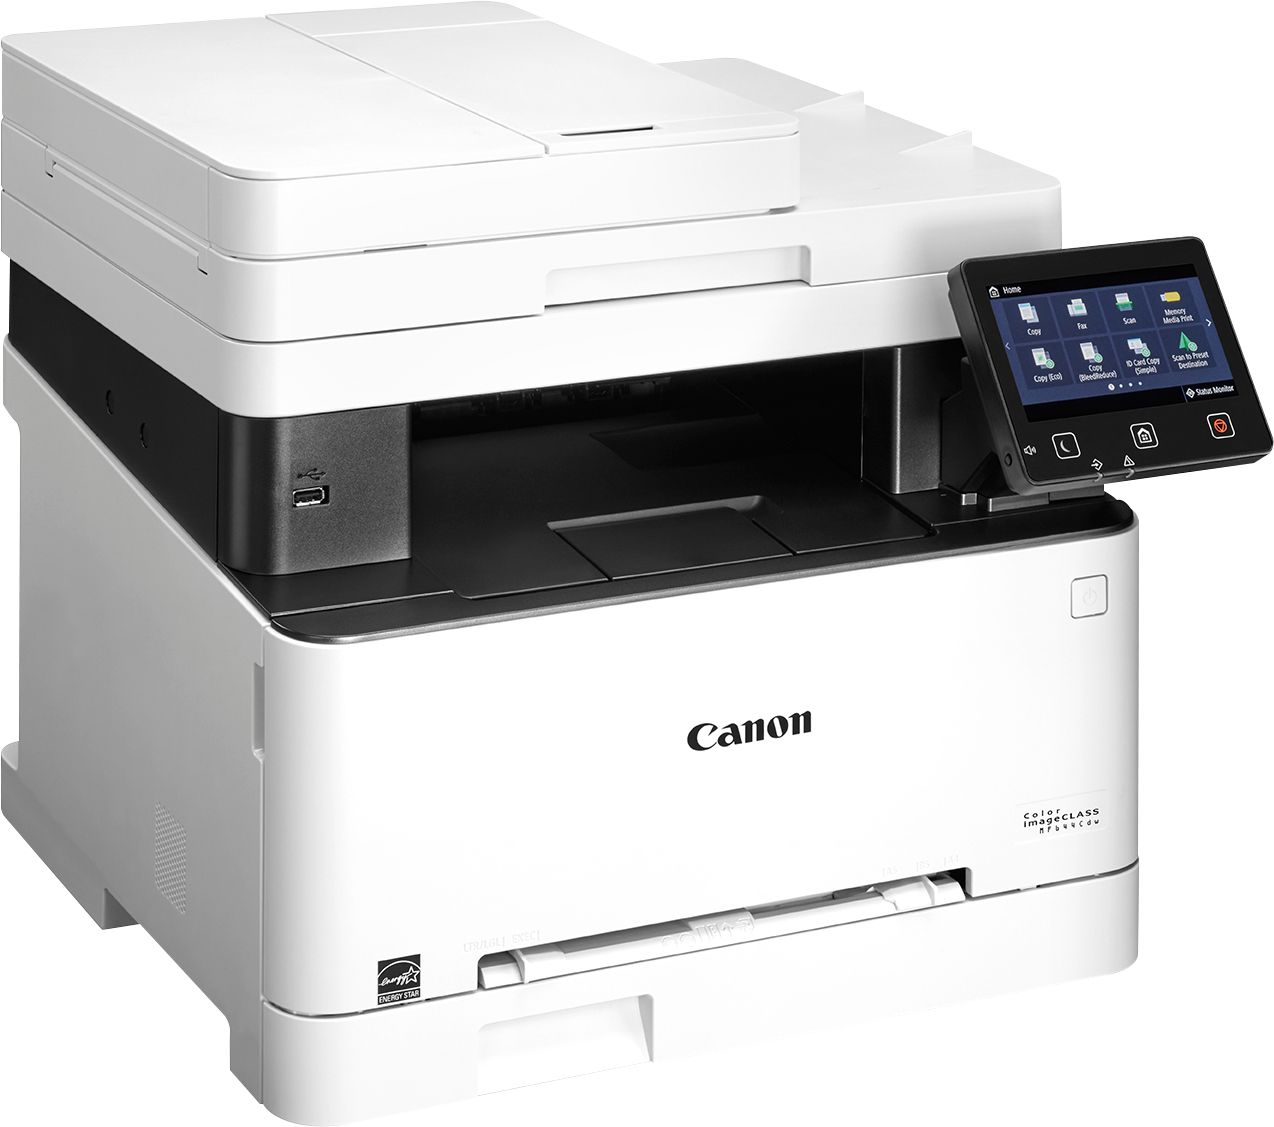 Angle View: Canon - imageCLASS MF644Cdw Wireless Color All-In-One Laser Printer - White